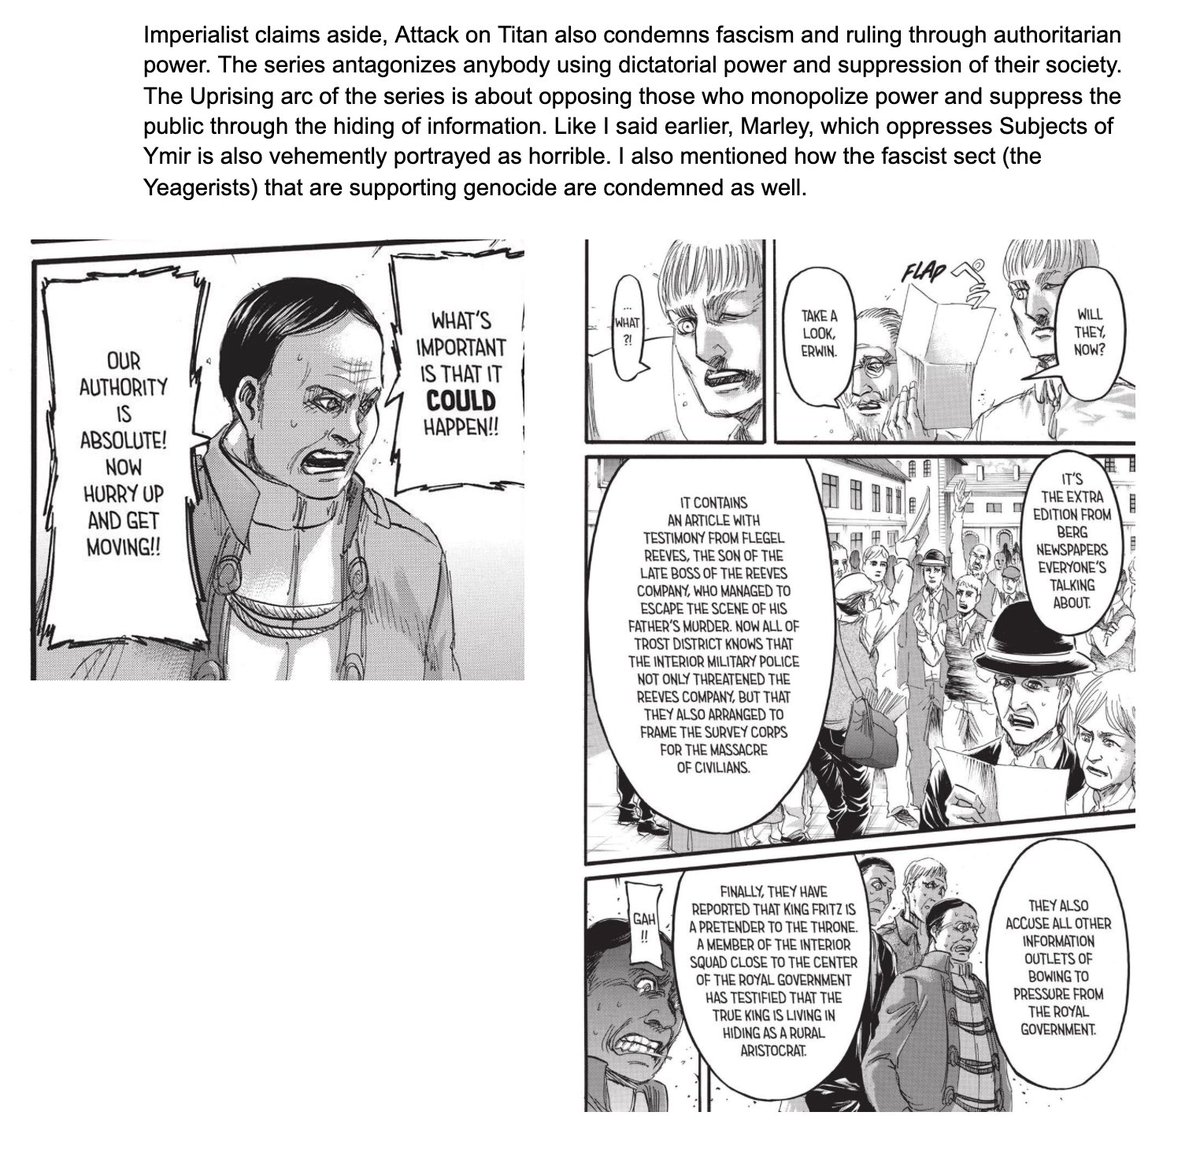 Attack on Titan is NOT the pro-war, pro-fascism, pro-imperialism, or antisemitic propaganda that people have been accusing it of being.A look into details within the context of the story and the story’s themes shows these claims are unsubstantiated. Thread (Manga Spoilers):